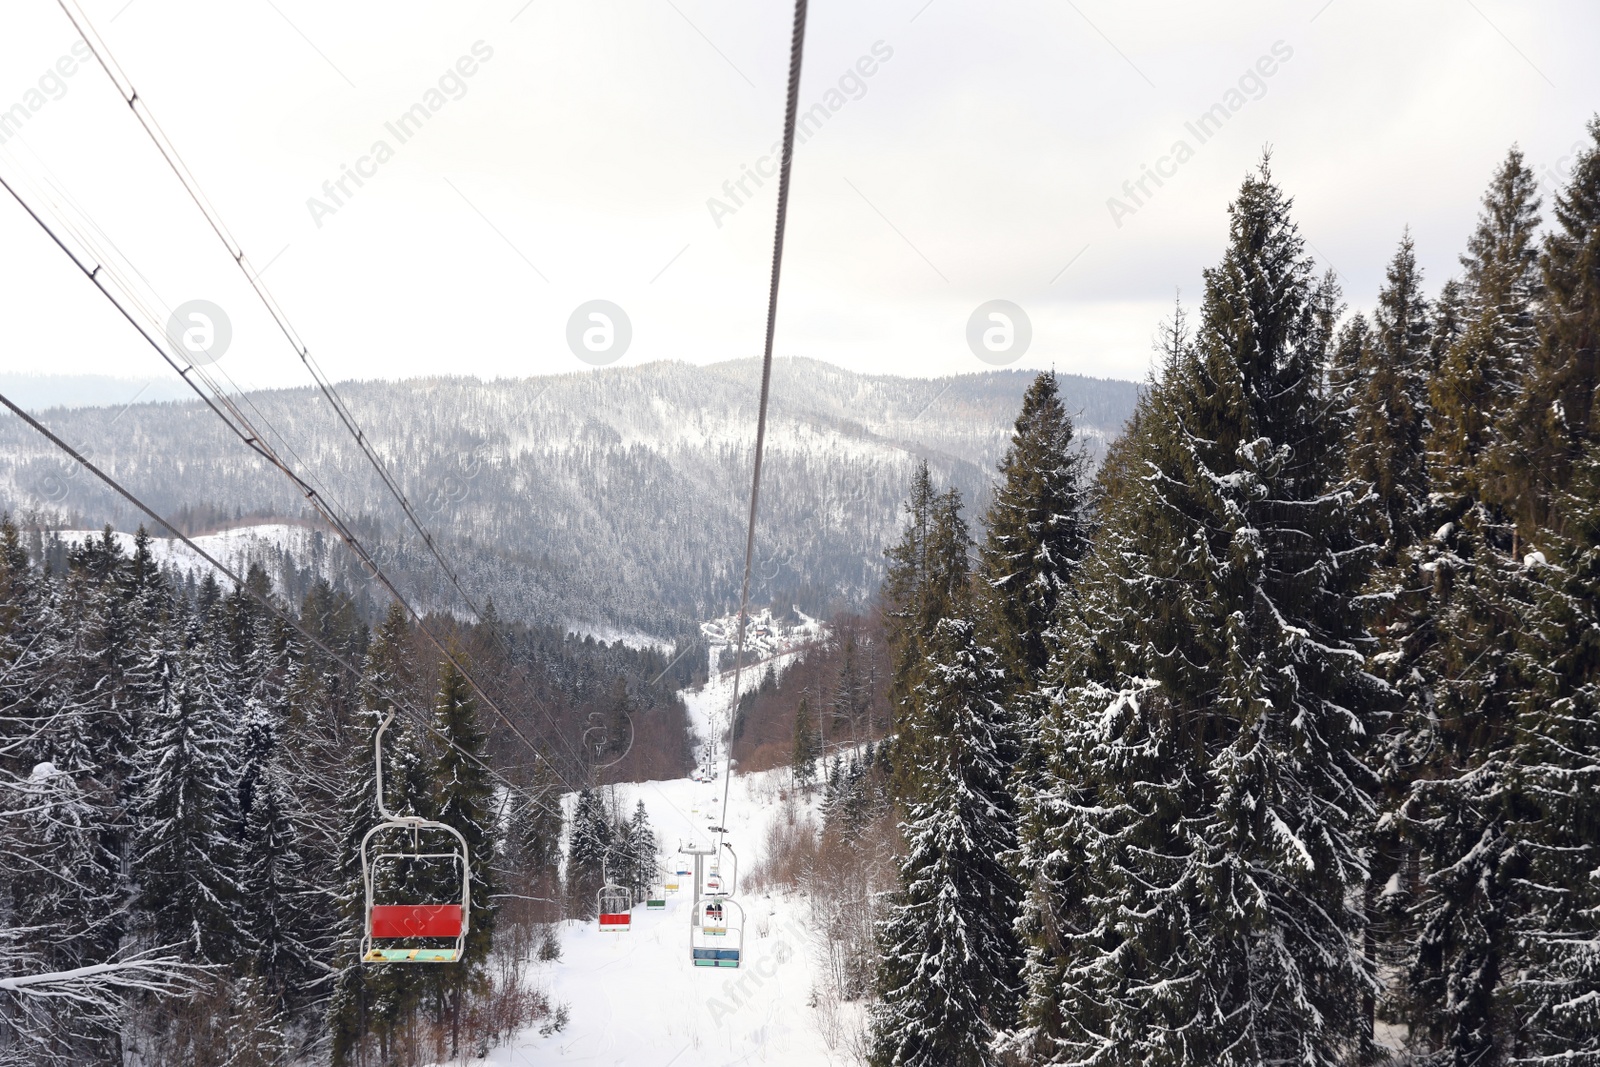 Photo of Picturesque mountain landscape with snowy forest in winter, view from ski lift